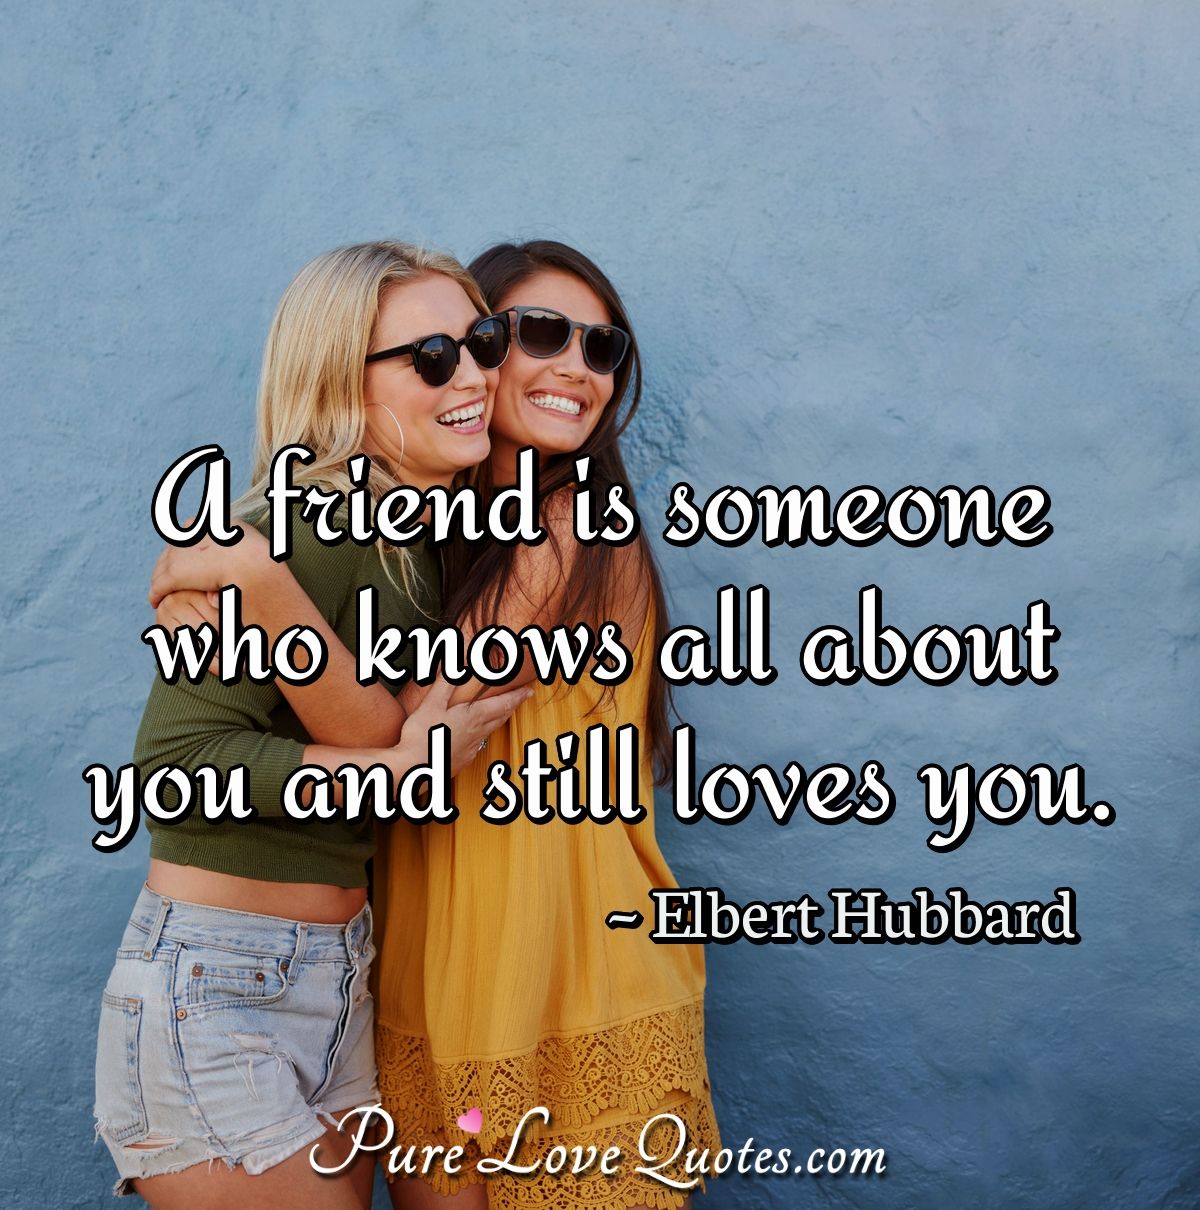 A friend is someone who knows all about you and still loves you. - Elbert Hubbard